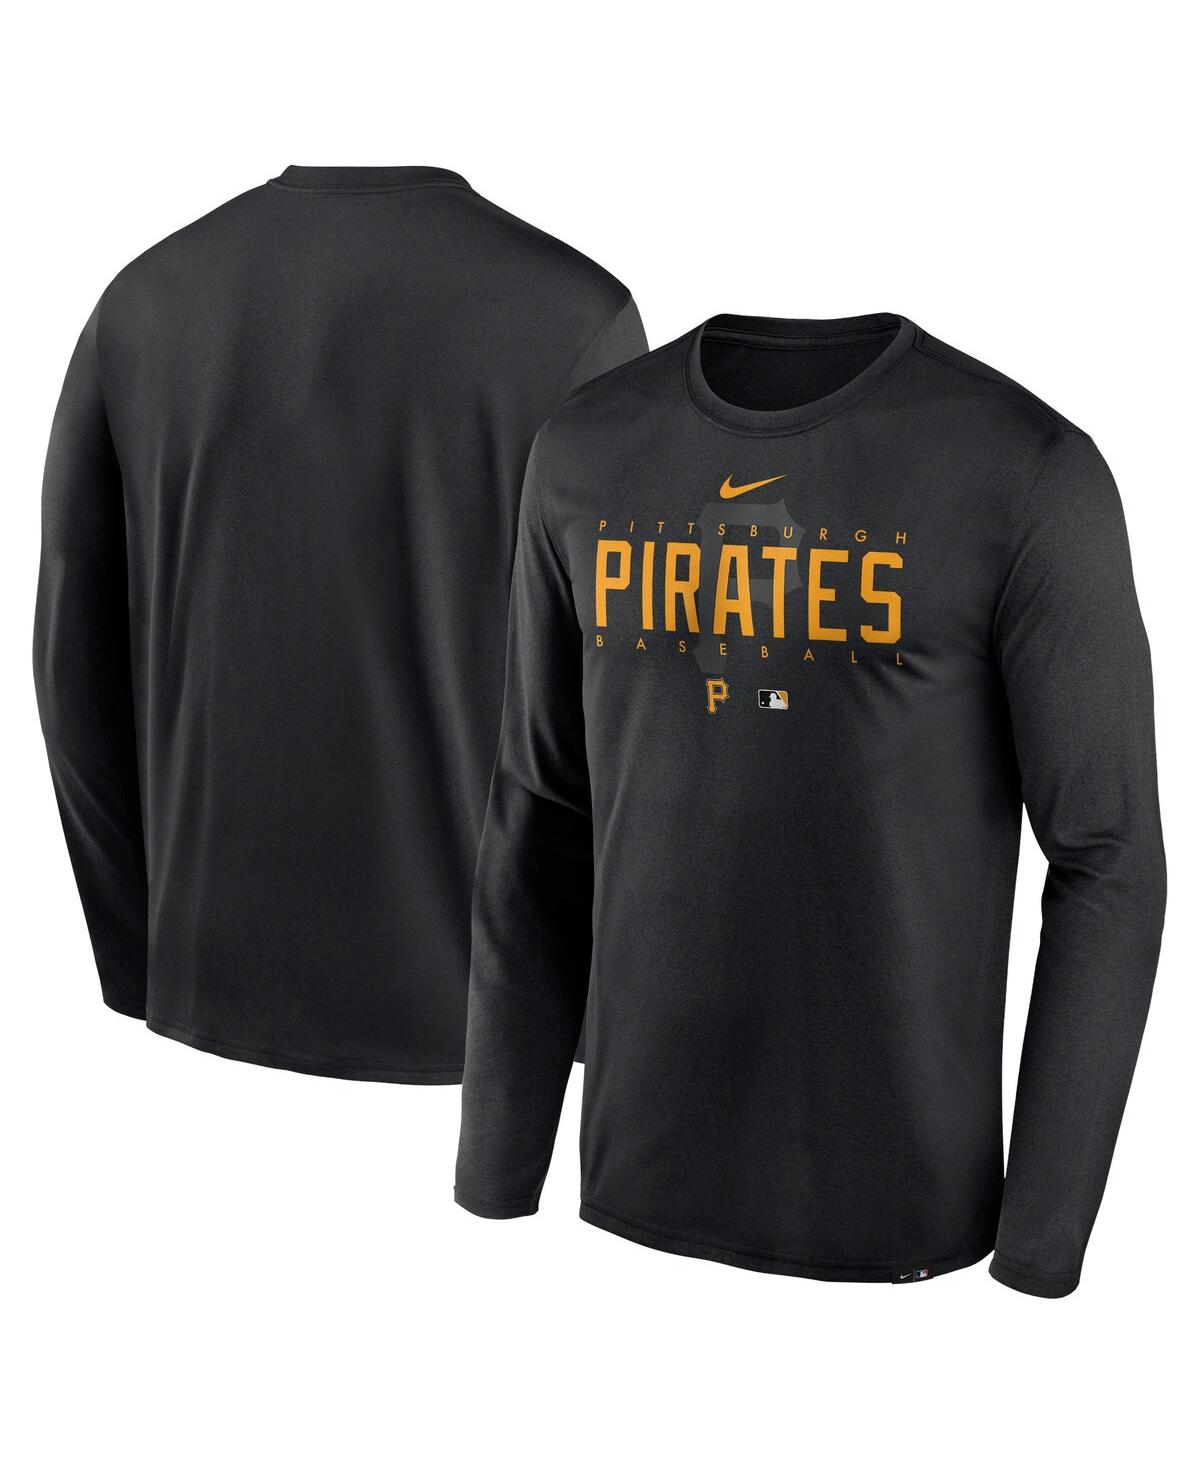 Nike Men's  Black Pittsburgh Pirates Authentic Collection Team Logo Legend Performance Long Sleeve T-